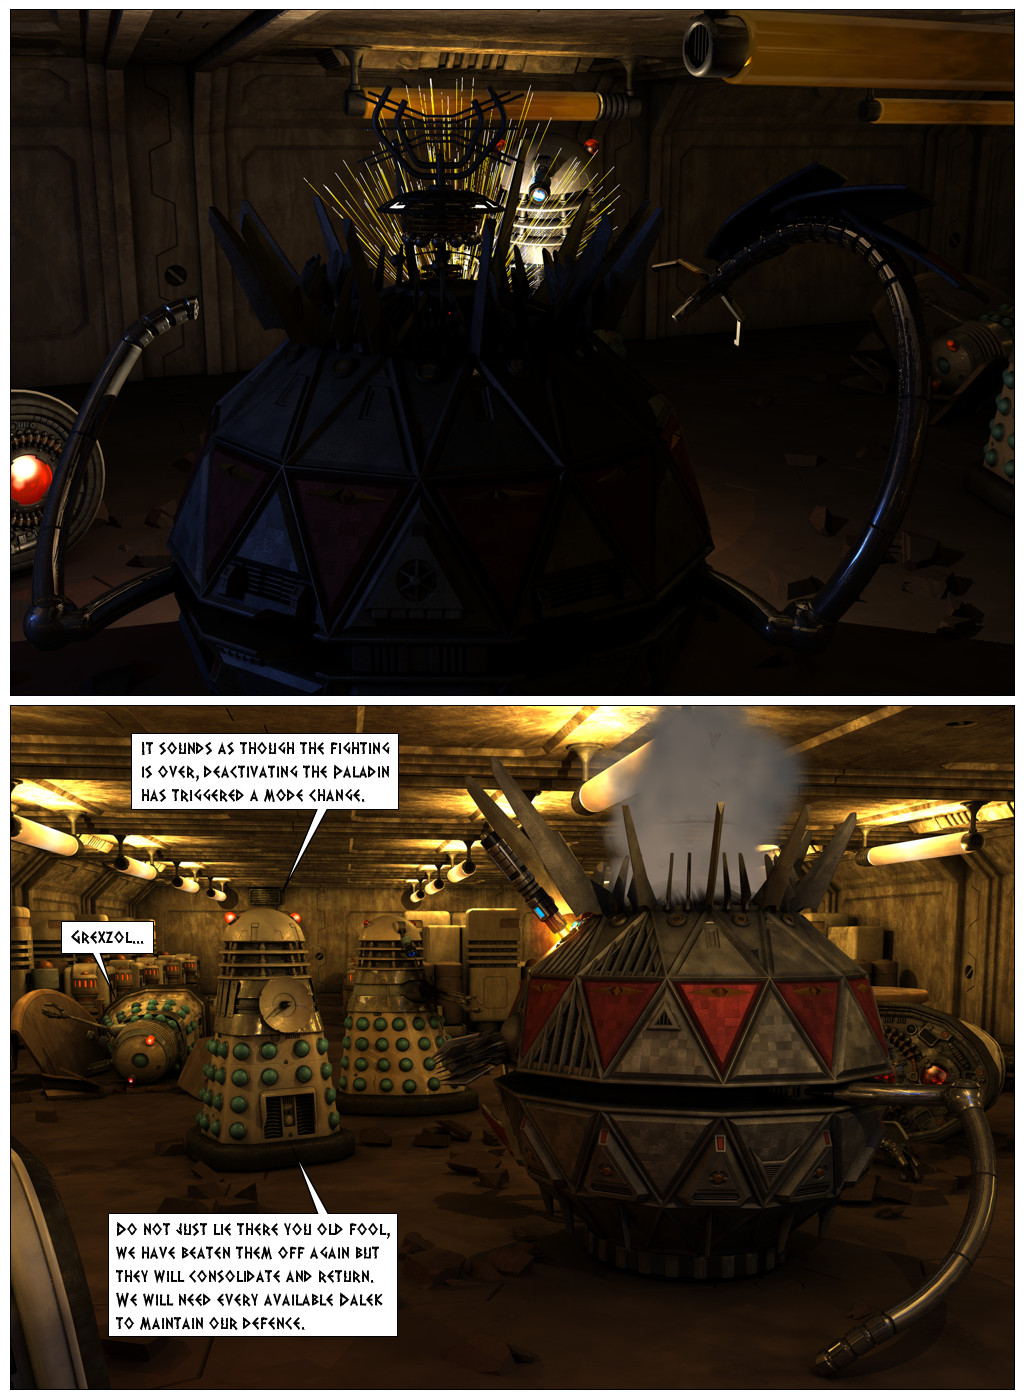 Page 160 - click for next